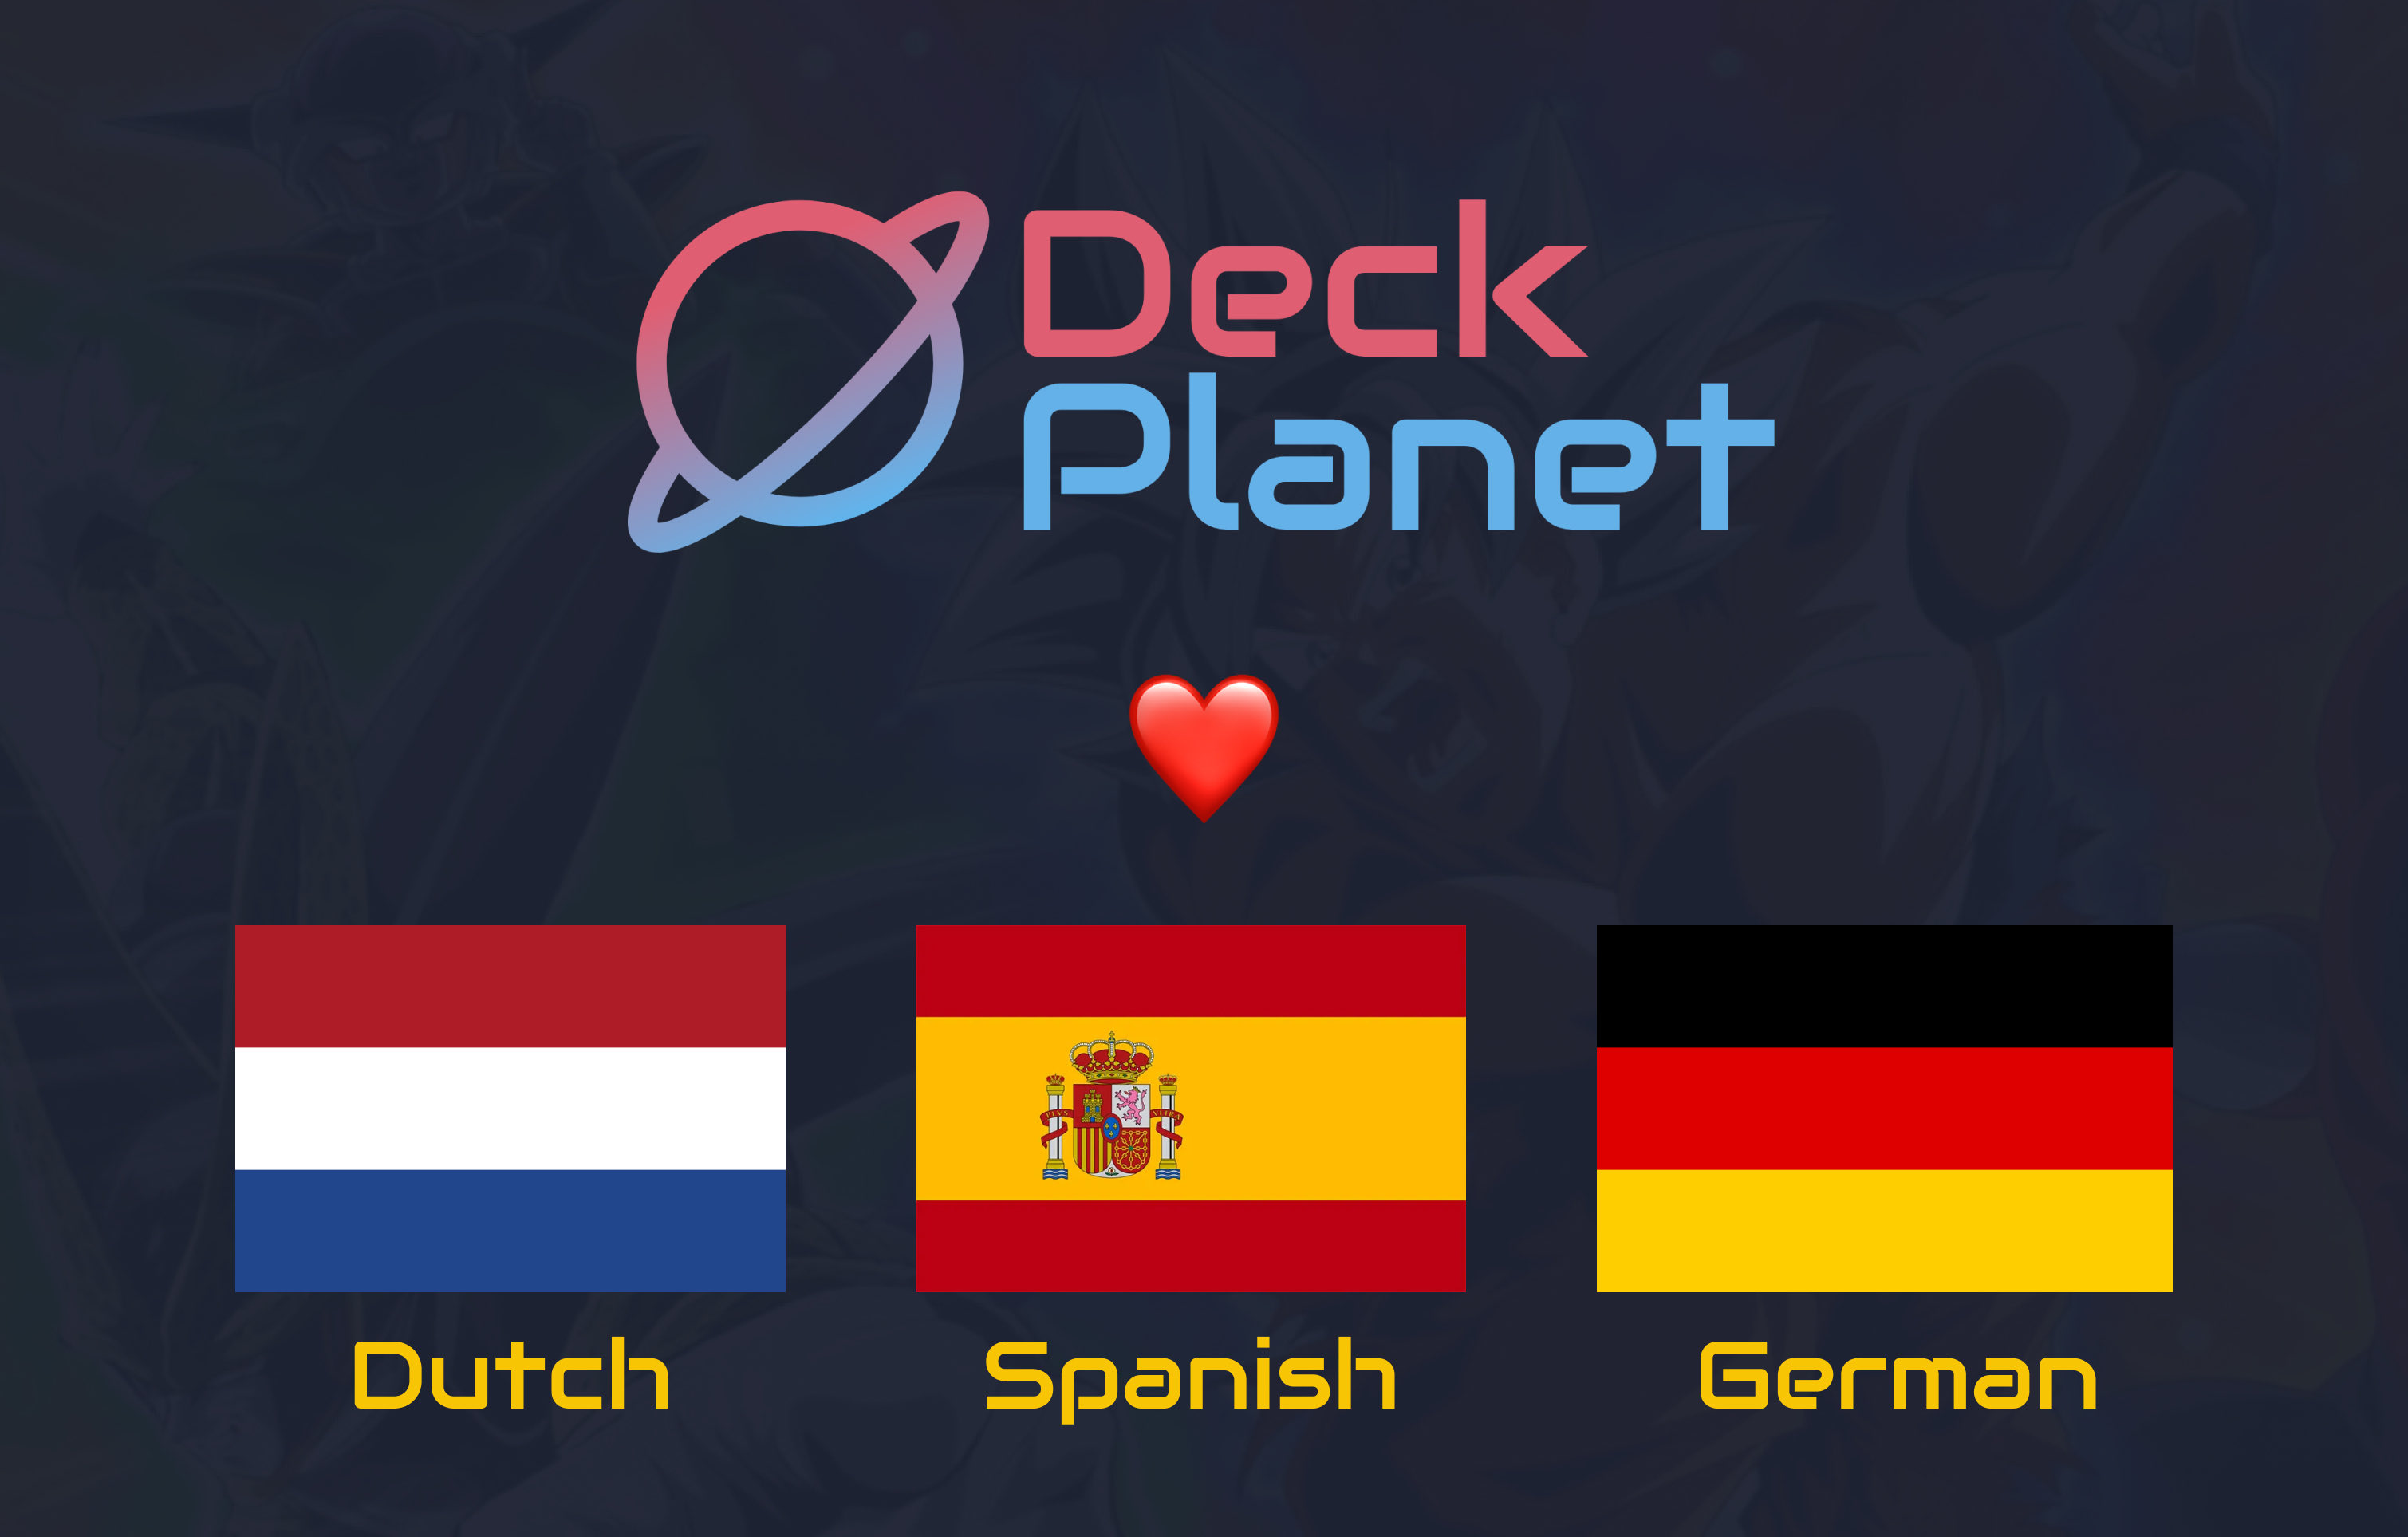 Welcome to DeckPlanet!